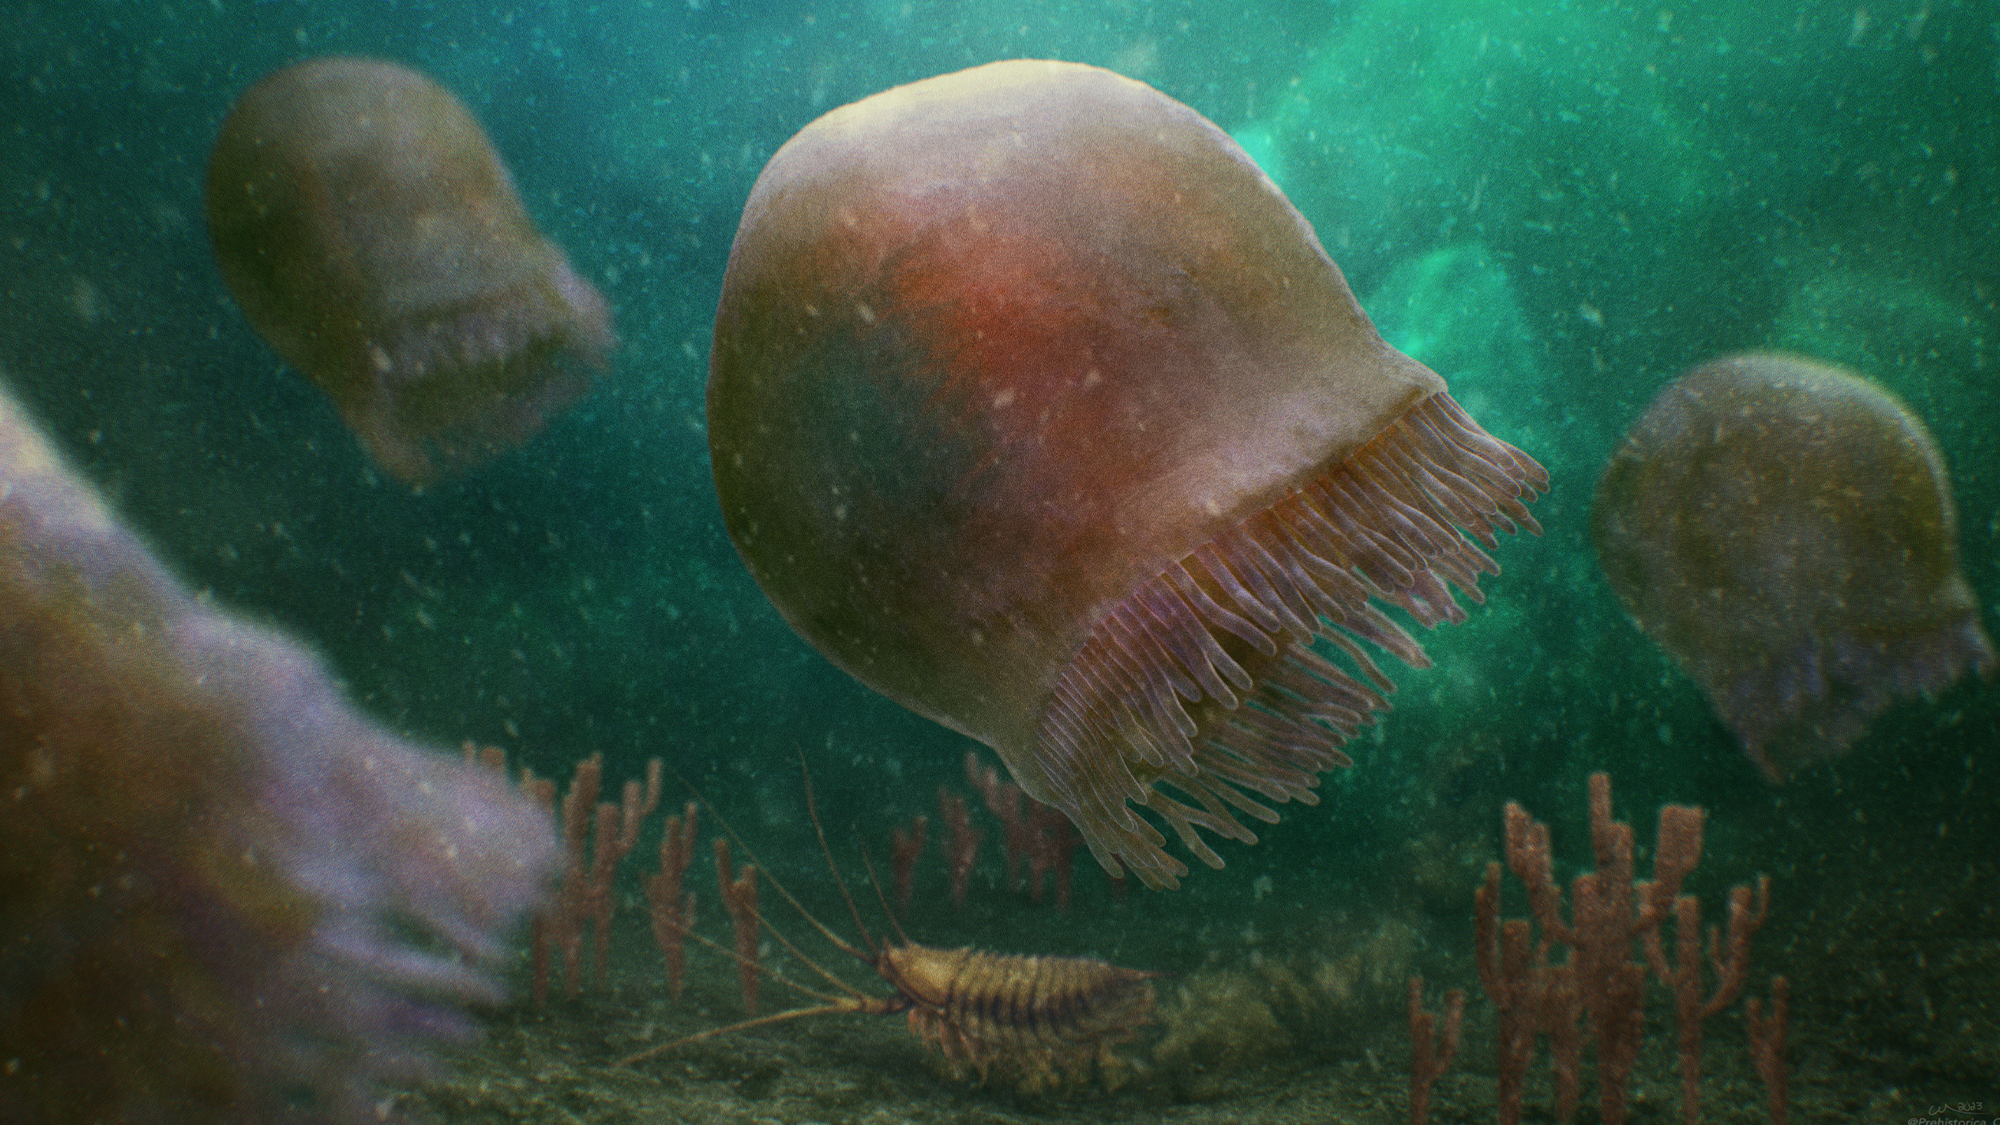 Jellyfish may have been roaming the seas for at least 500 million years